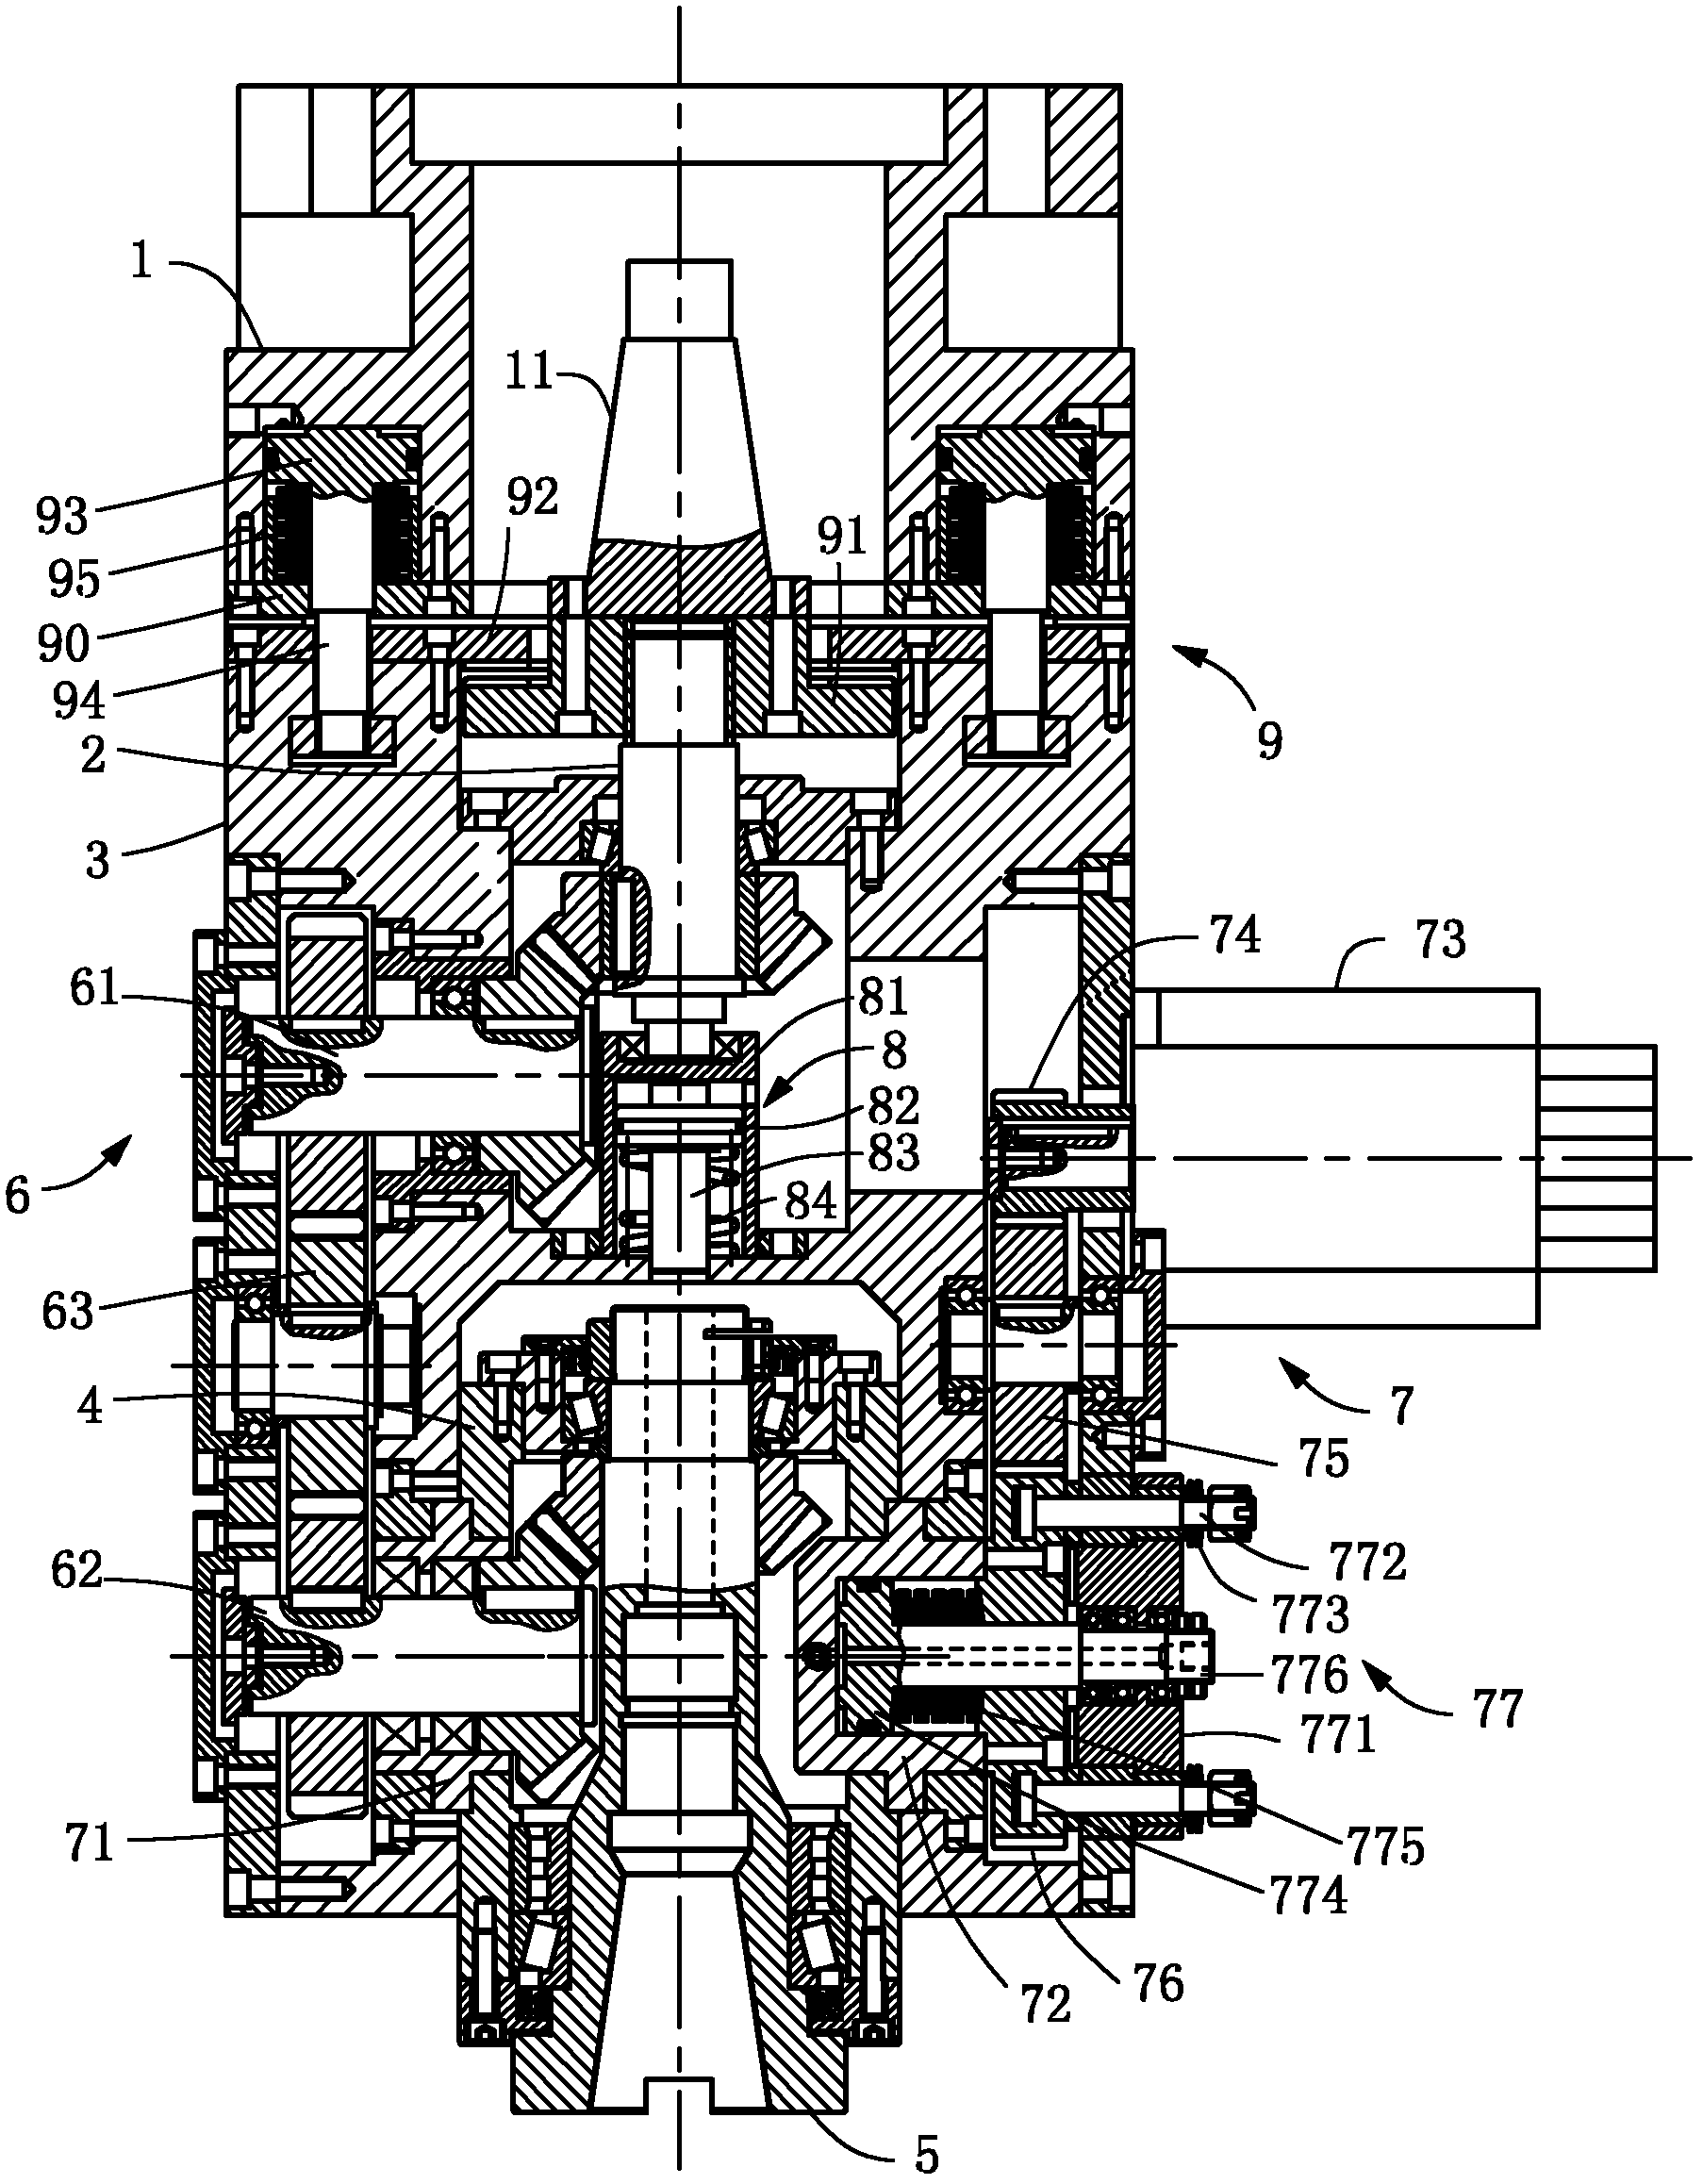 Five-axle power head used for numerical control milling machine